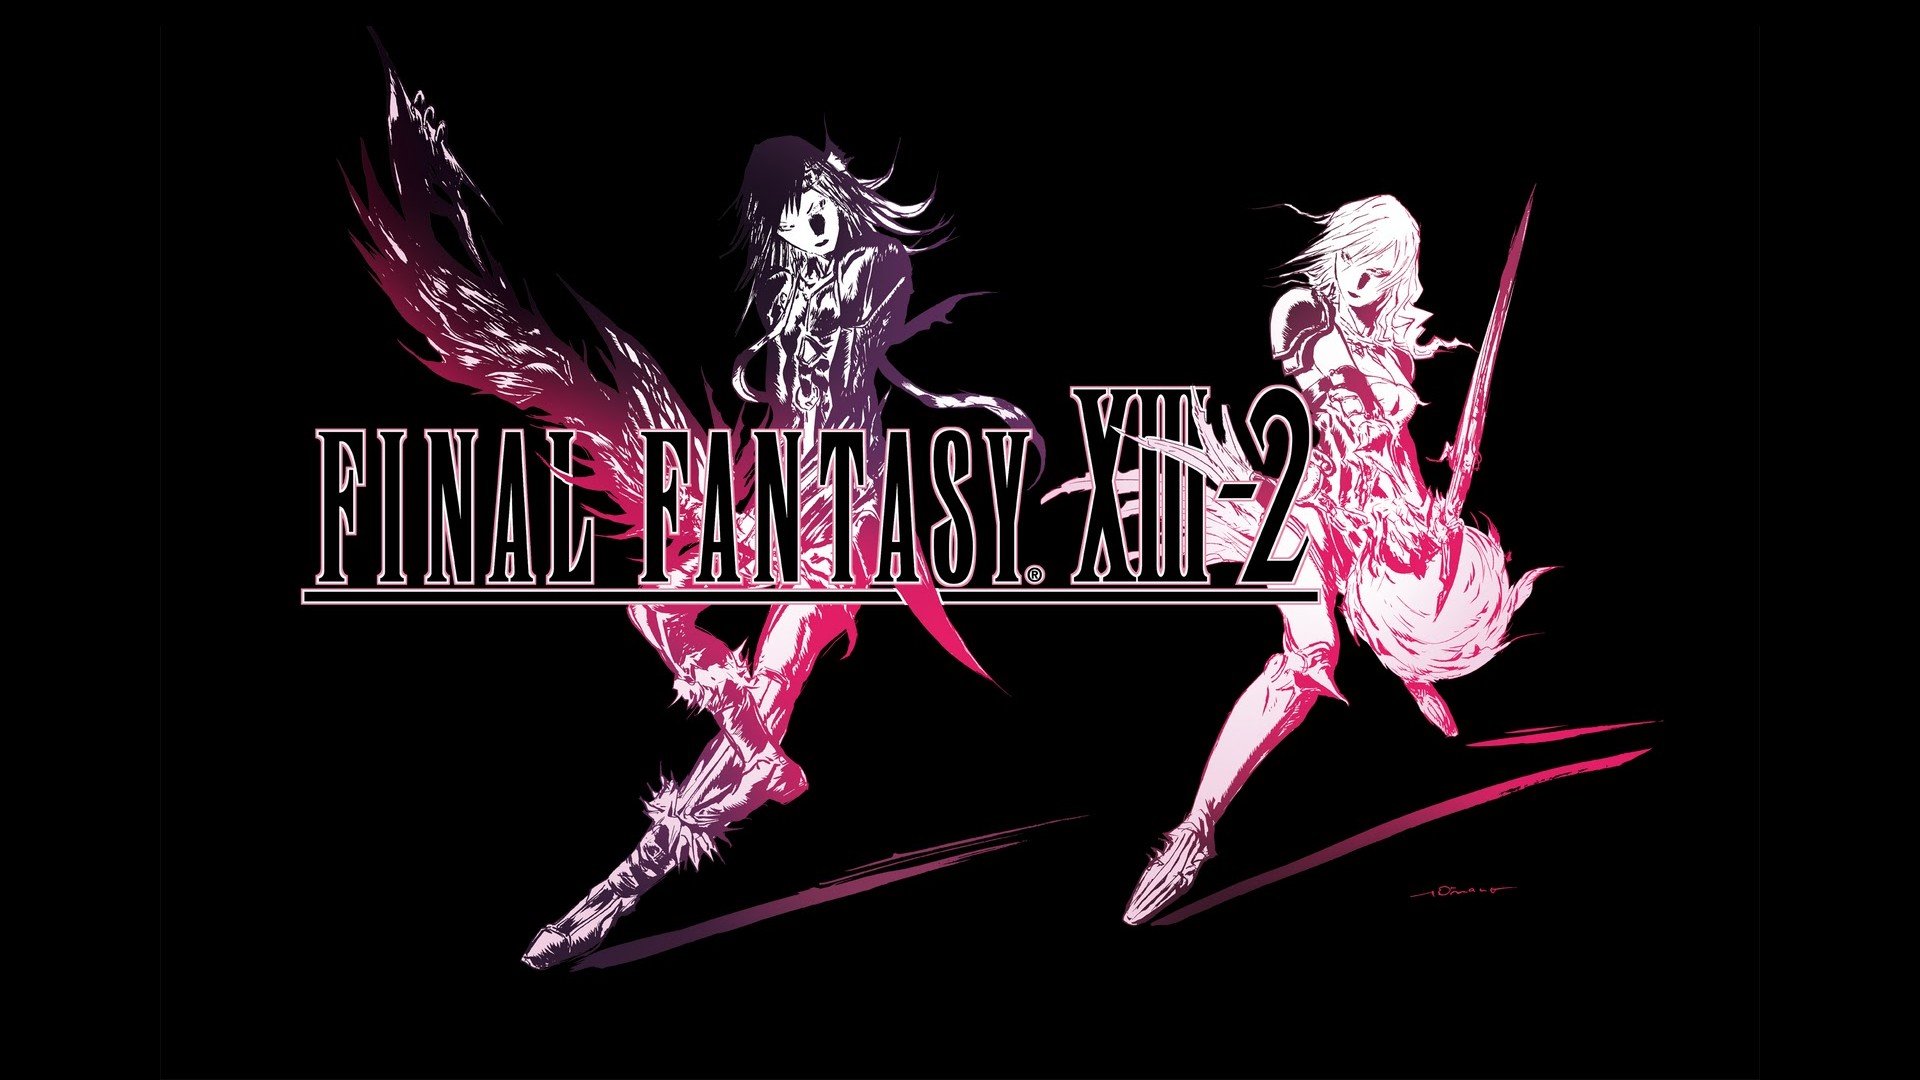 Download Hd 19x1080 Final Fantasy Xiii 2 Ff13 2 Pc Wallpaper Id 2536 For Free